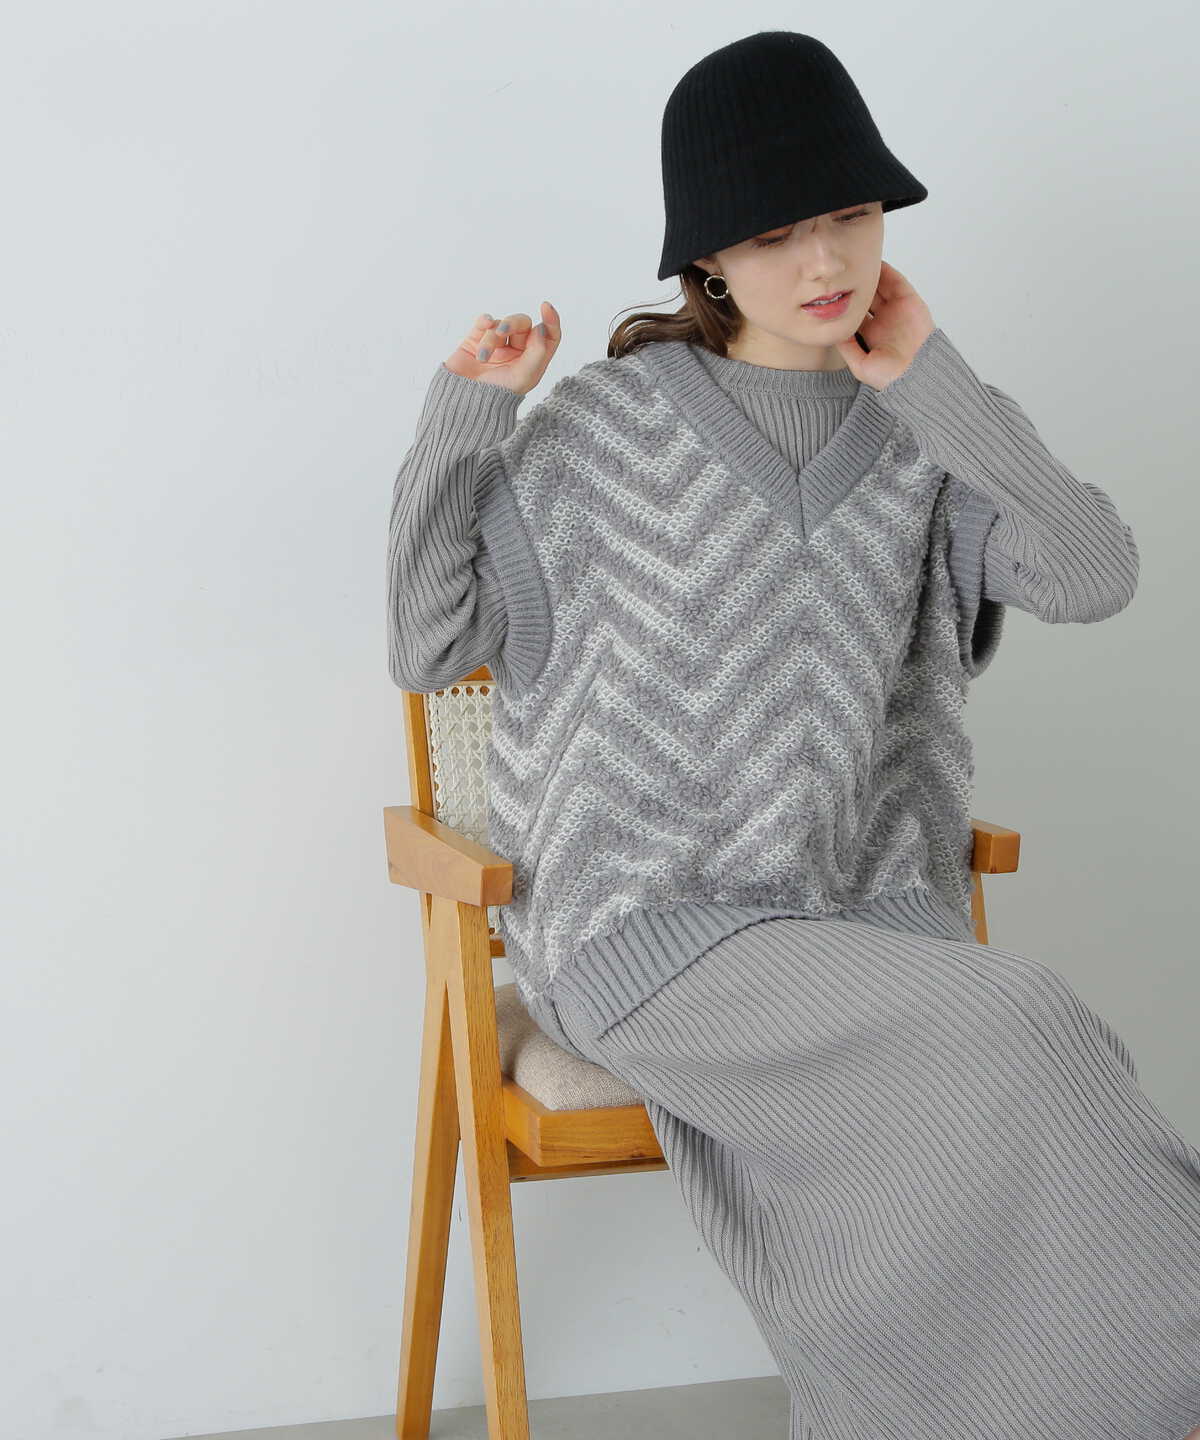 Girre layer knitted onepieceジレレイヤーニットワンピ